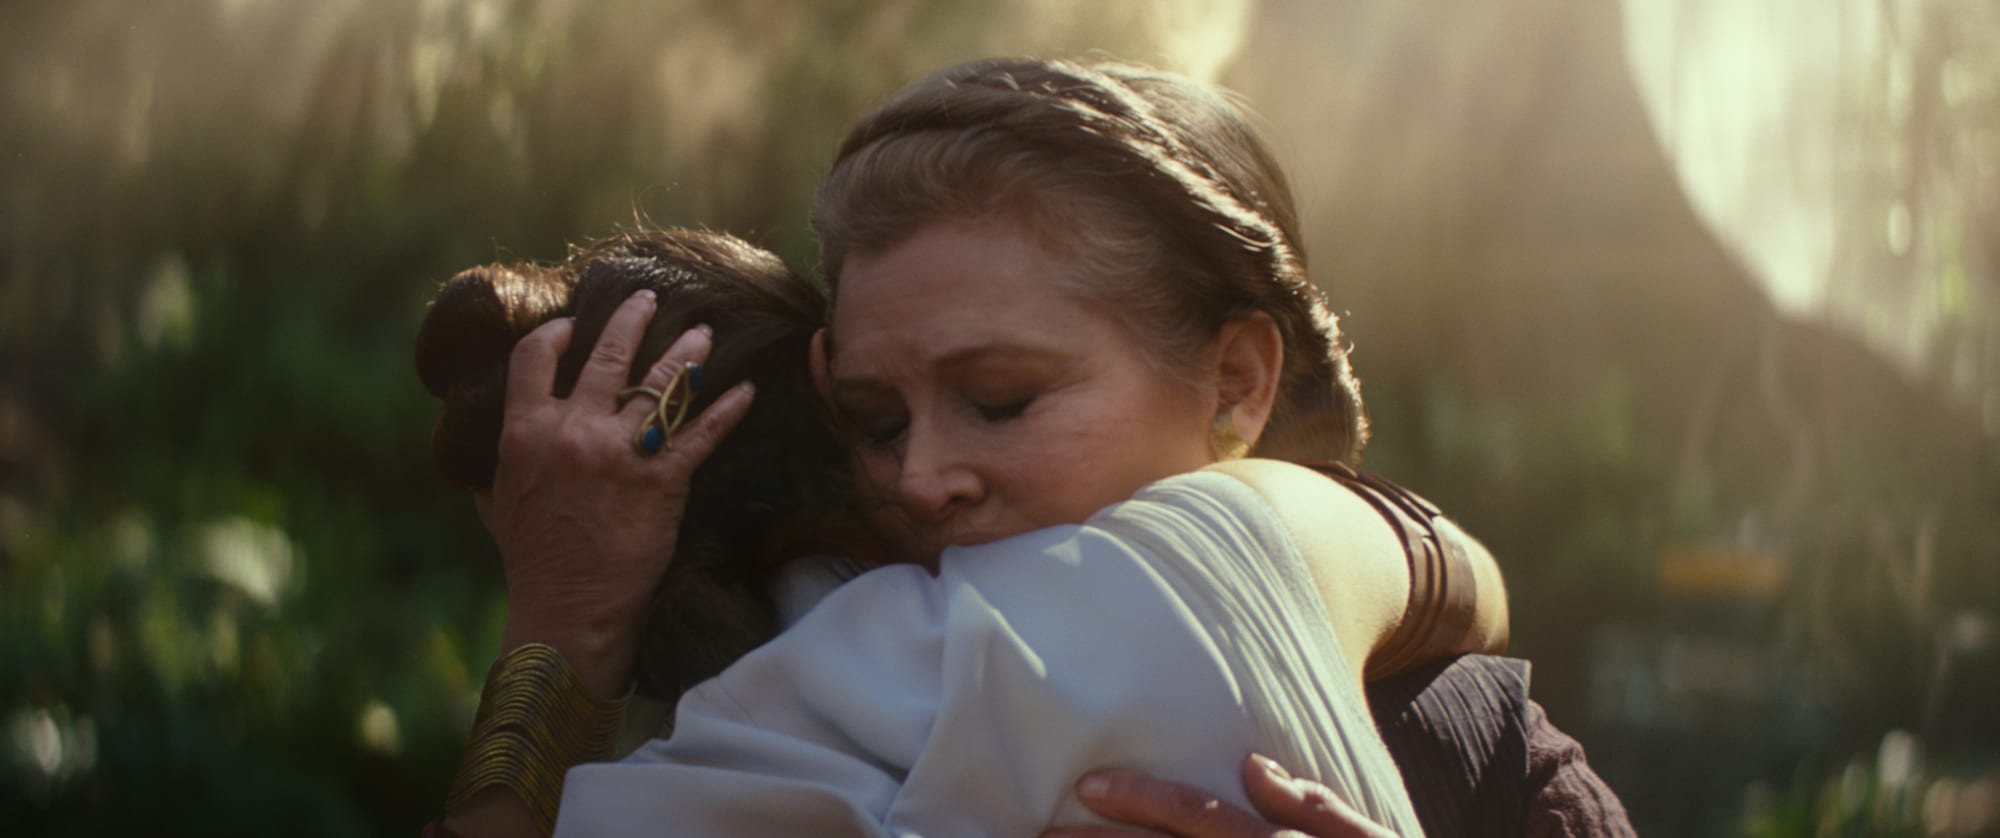 Star Wars: The Rise of Skywalker had far too much Carrie Fisher